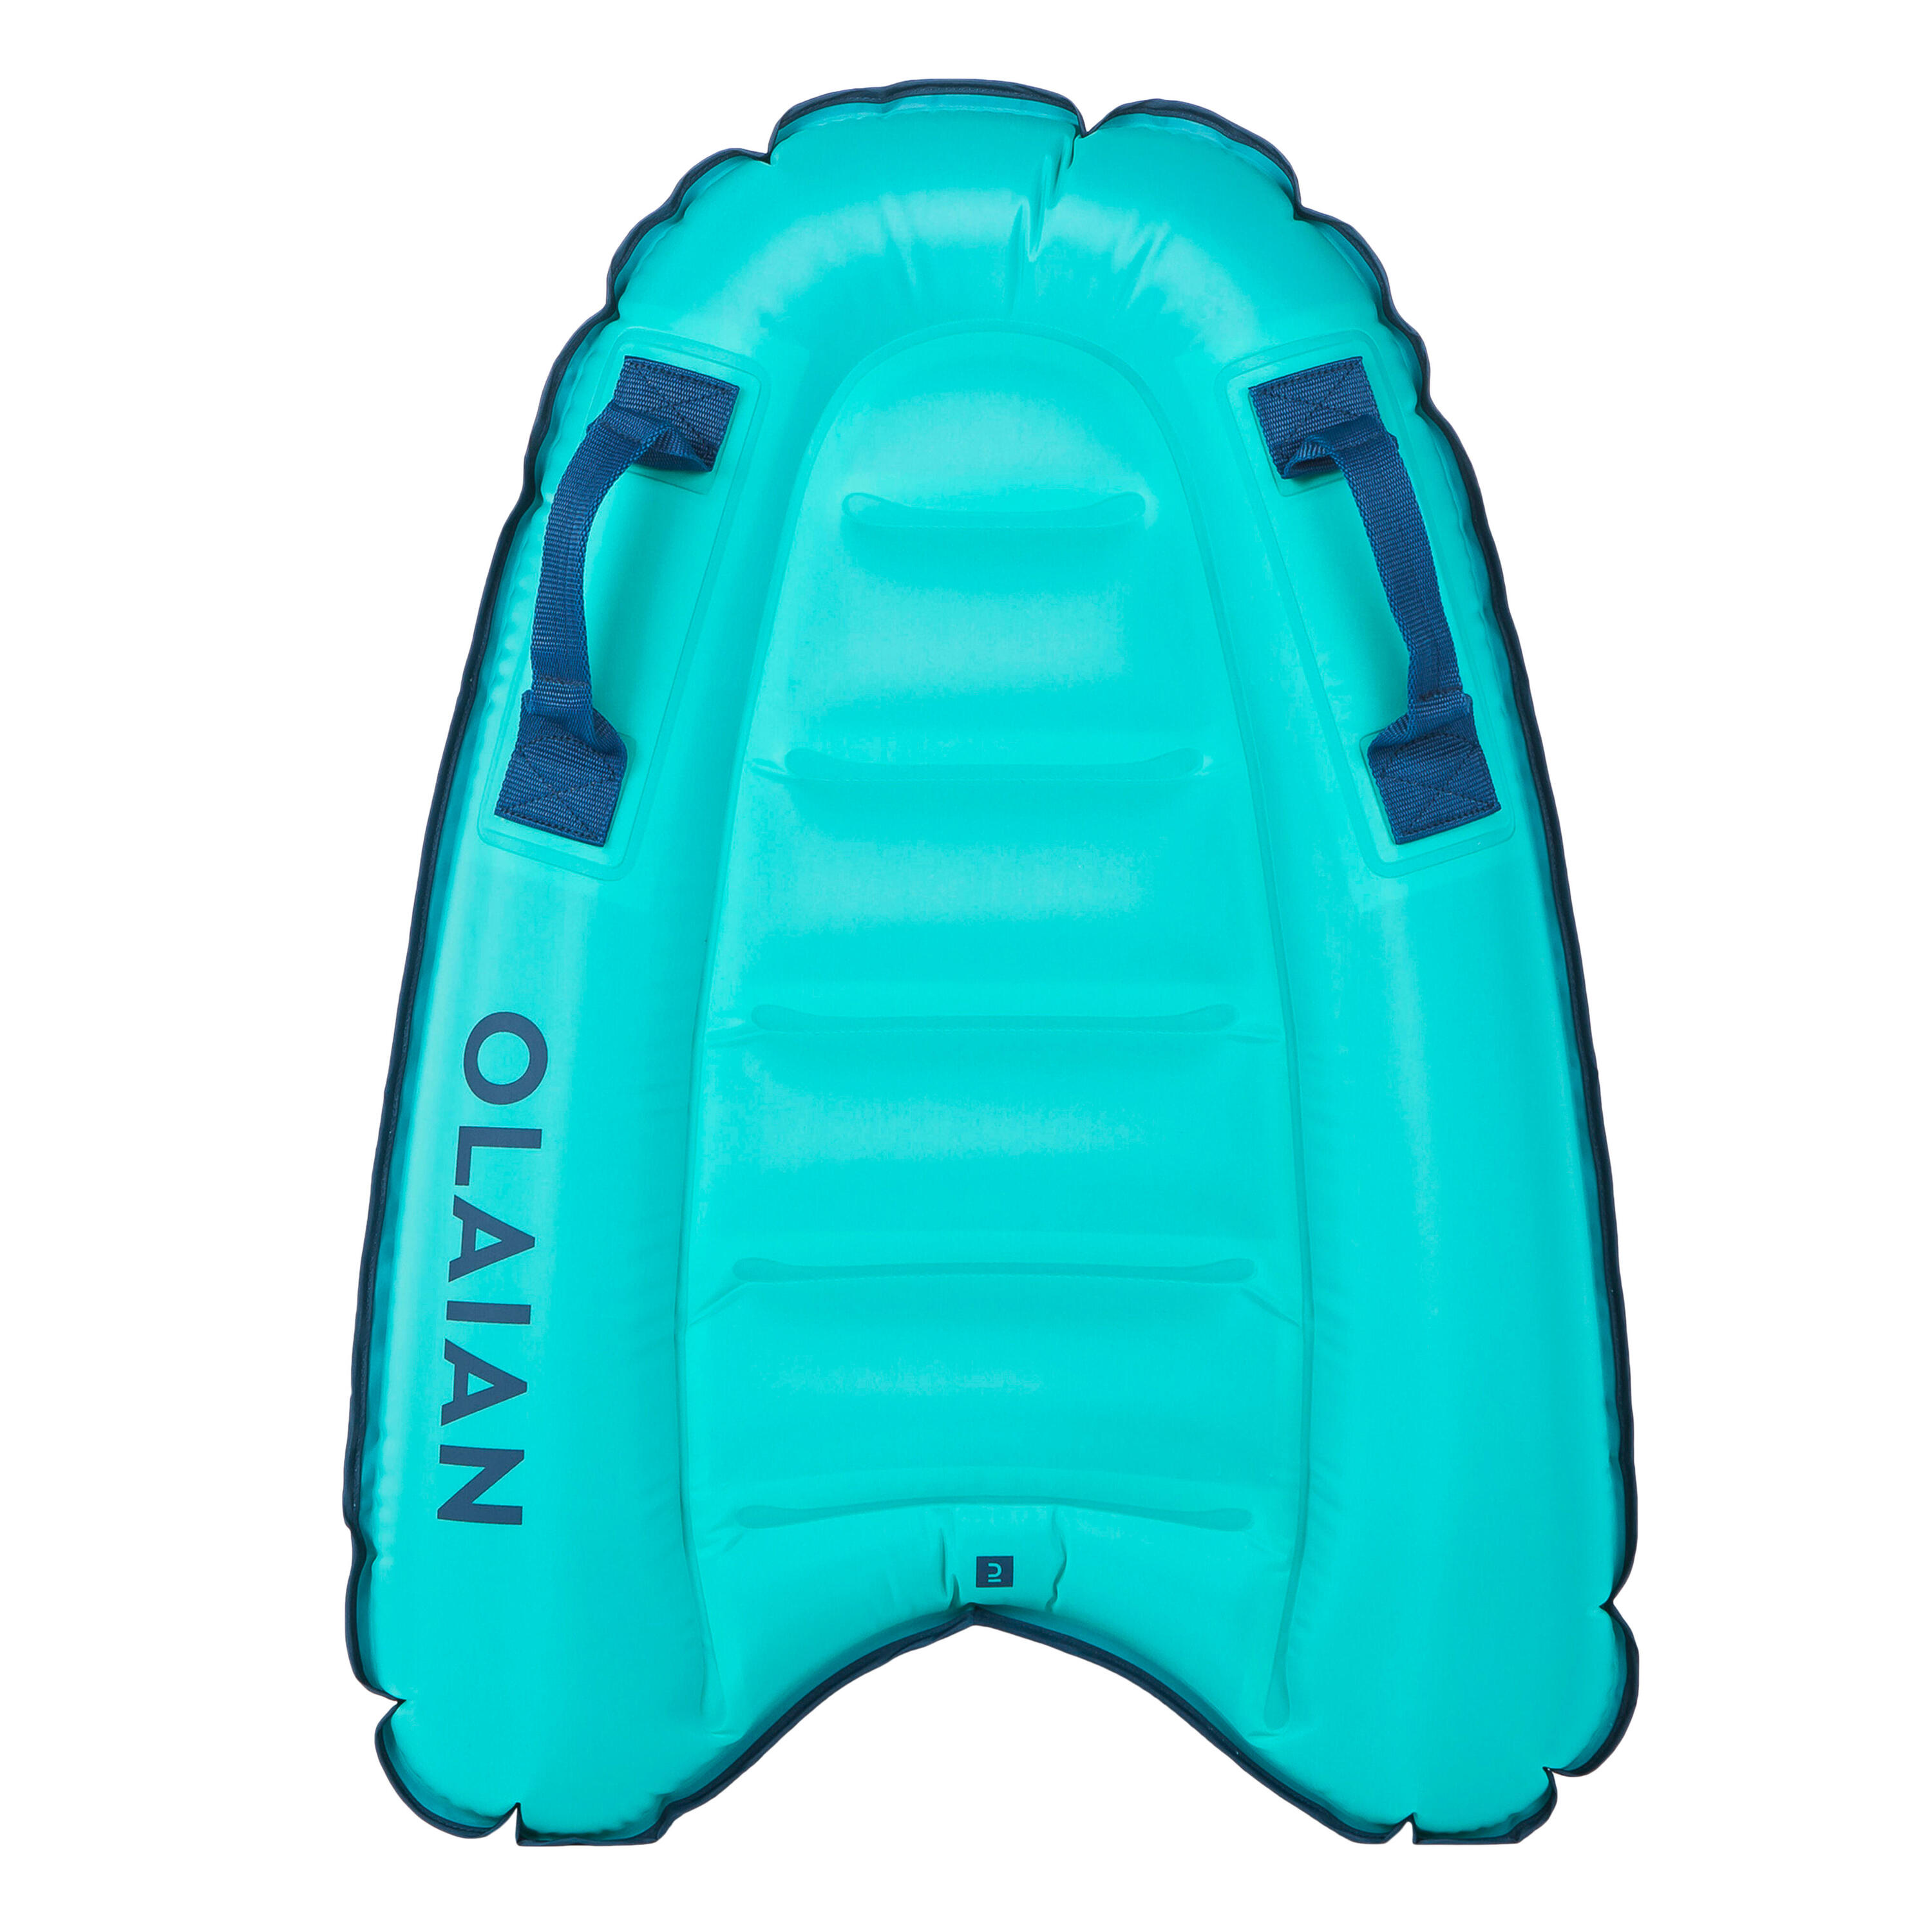 Kid's inflatable bodyboard for 4-8 year-olds (15-25 kg) - blue 2/12